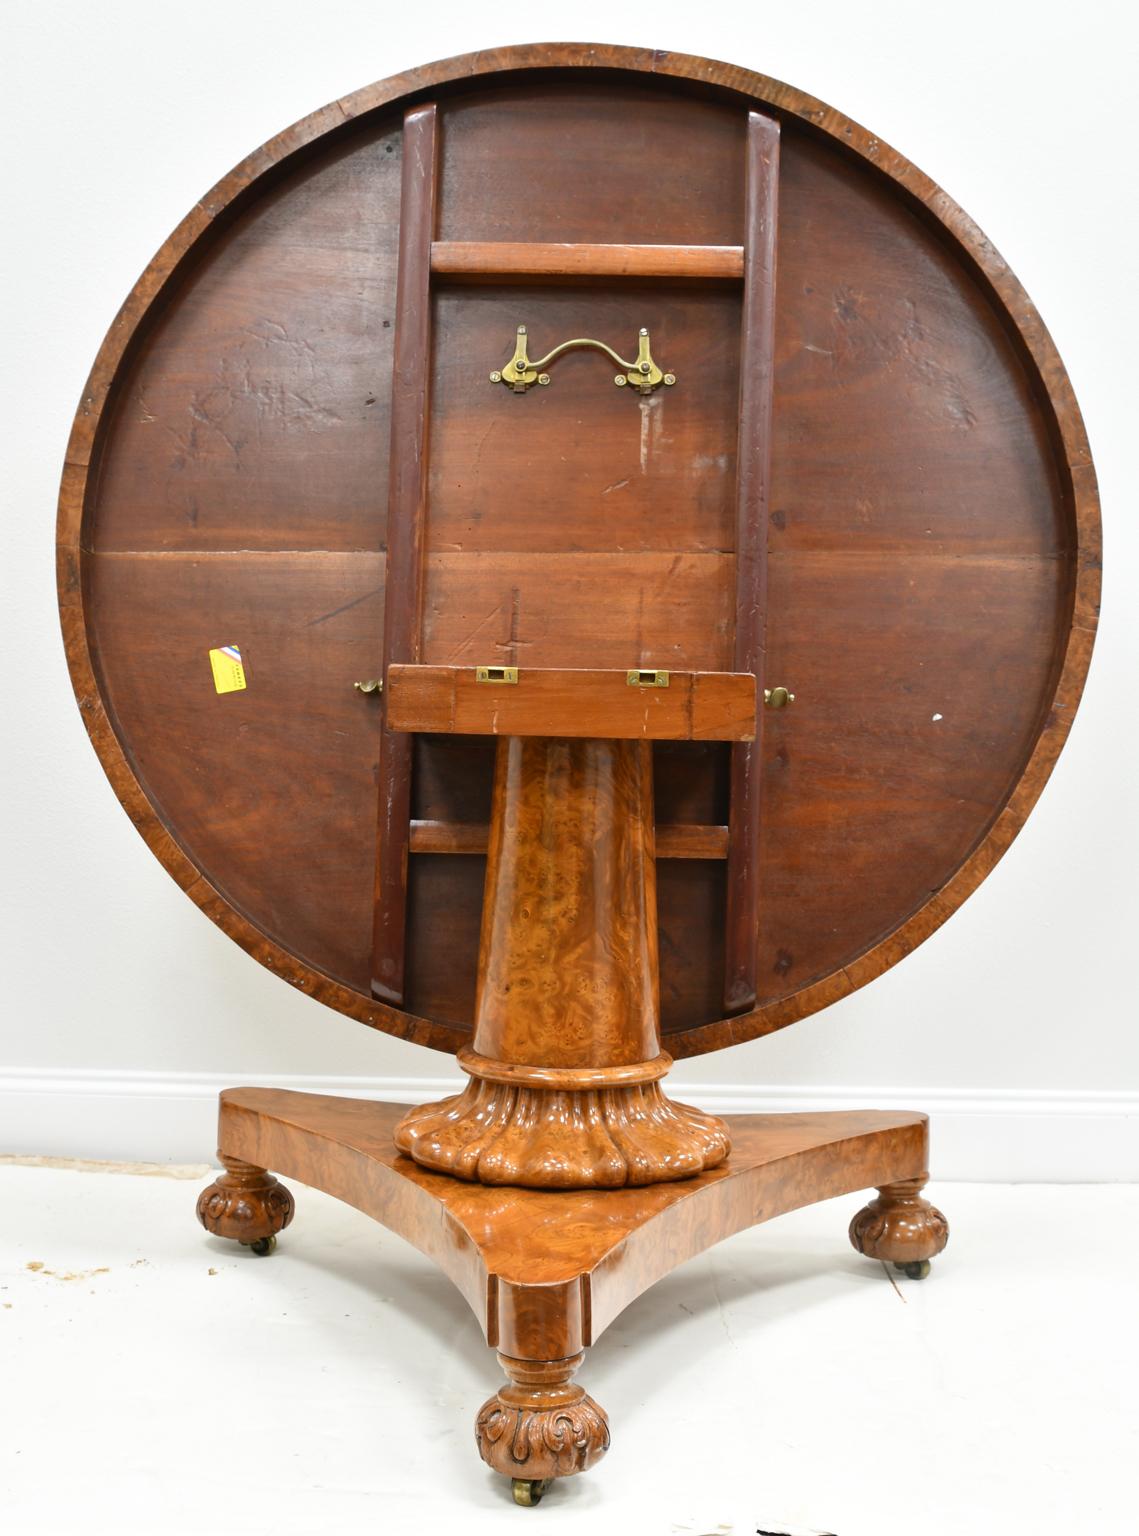 A fine William IV center table or loo table in beautiful burl ash wood with round top and apron on cylindrical column over a tripartite (triform) base with concave sides resting on carved bun feet. Burl wood top features a captivating pattern that